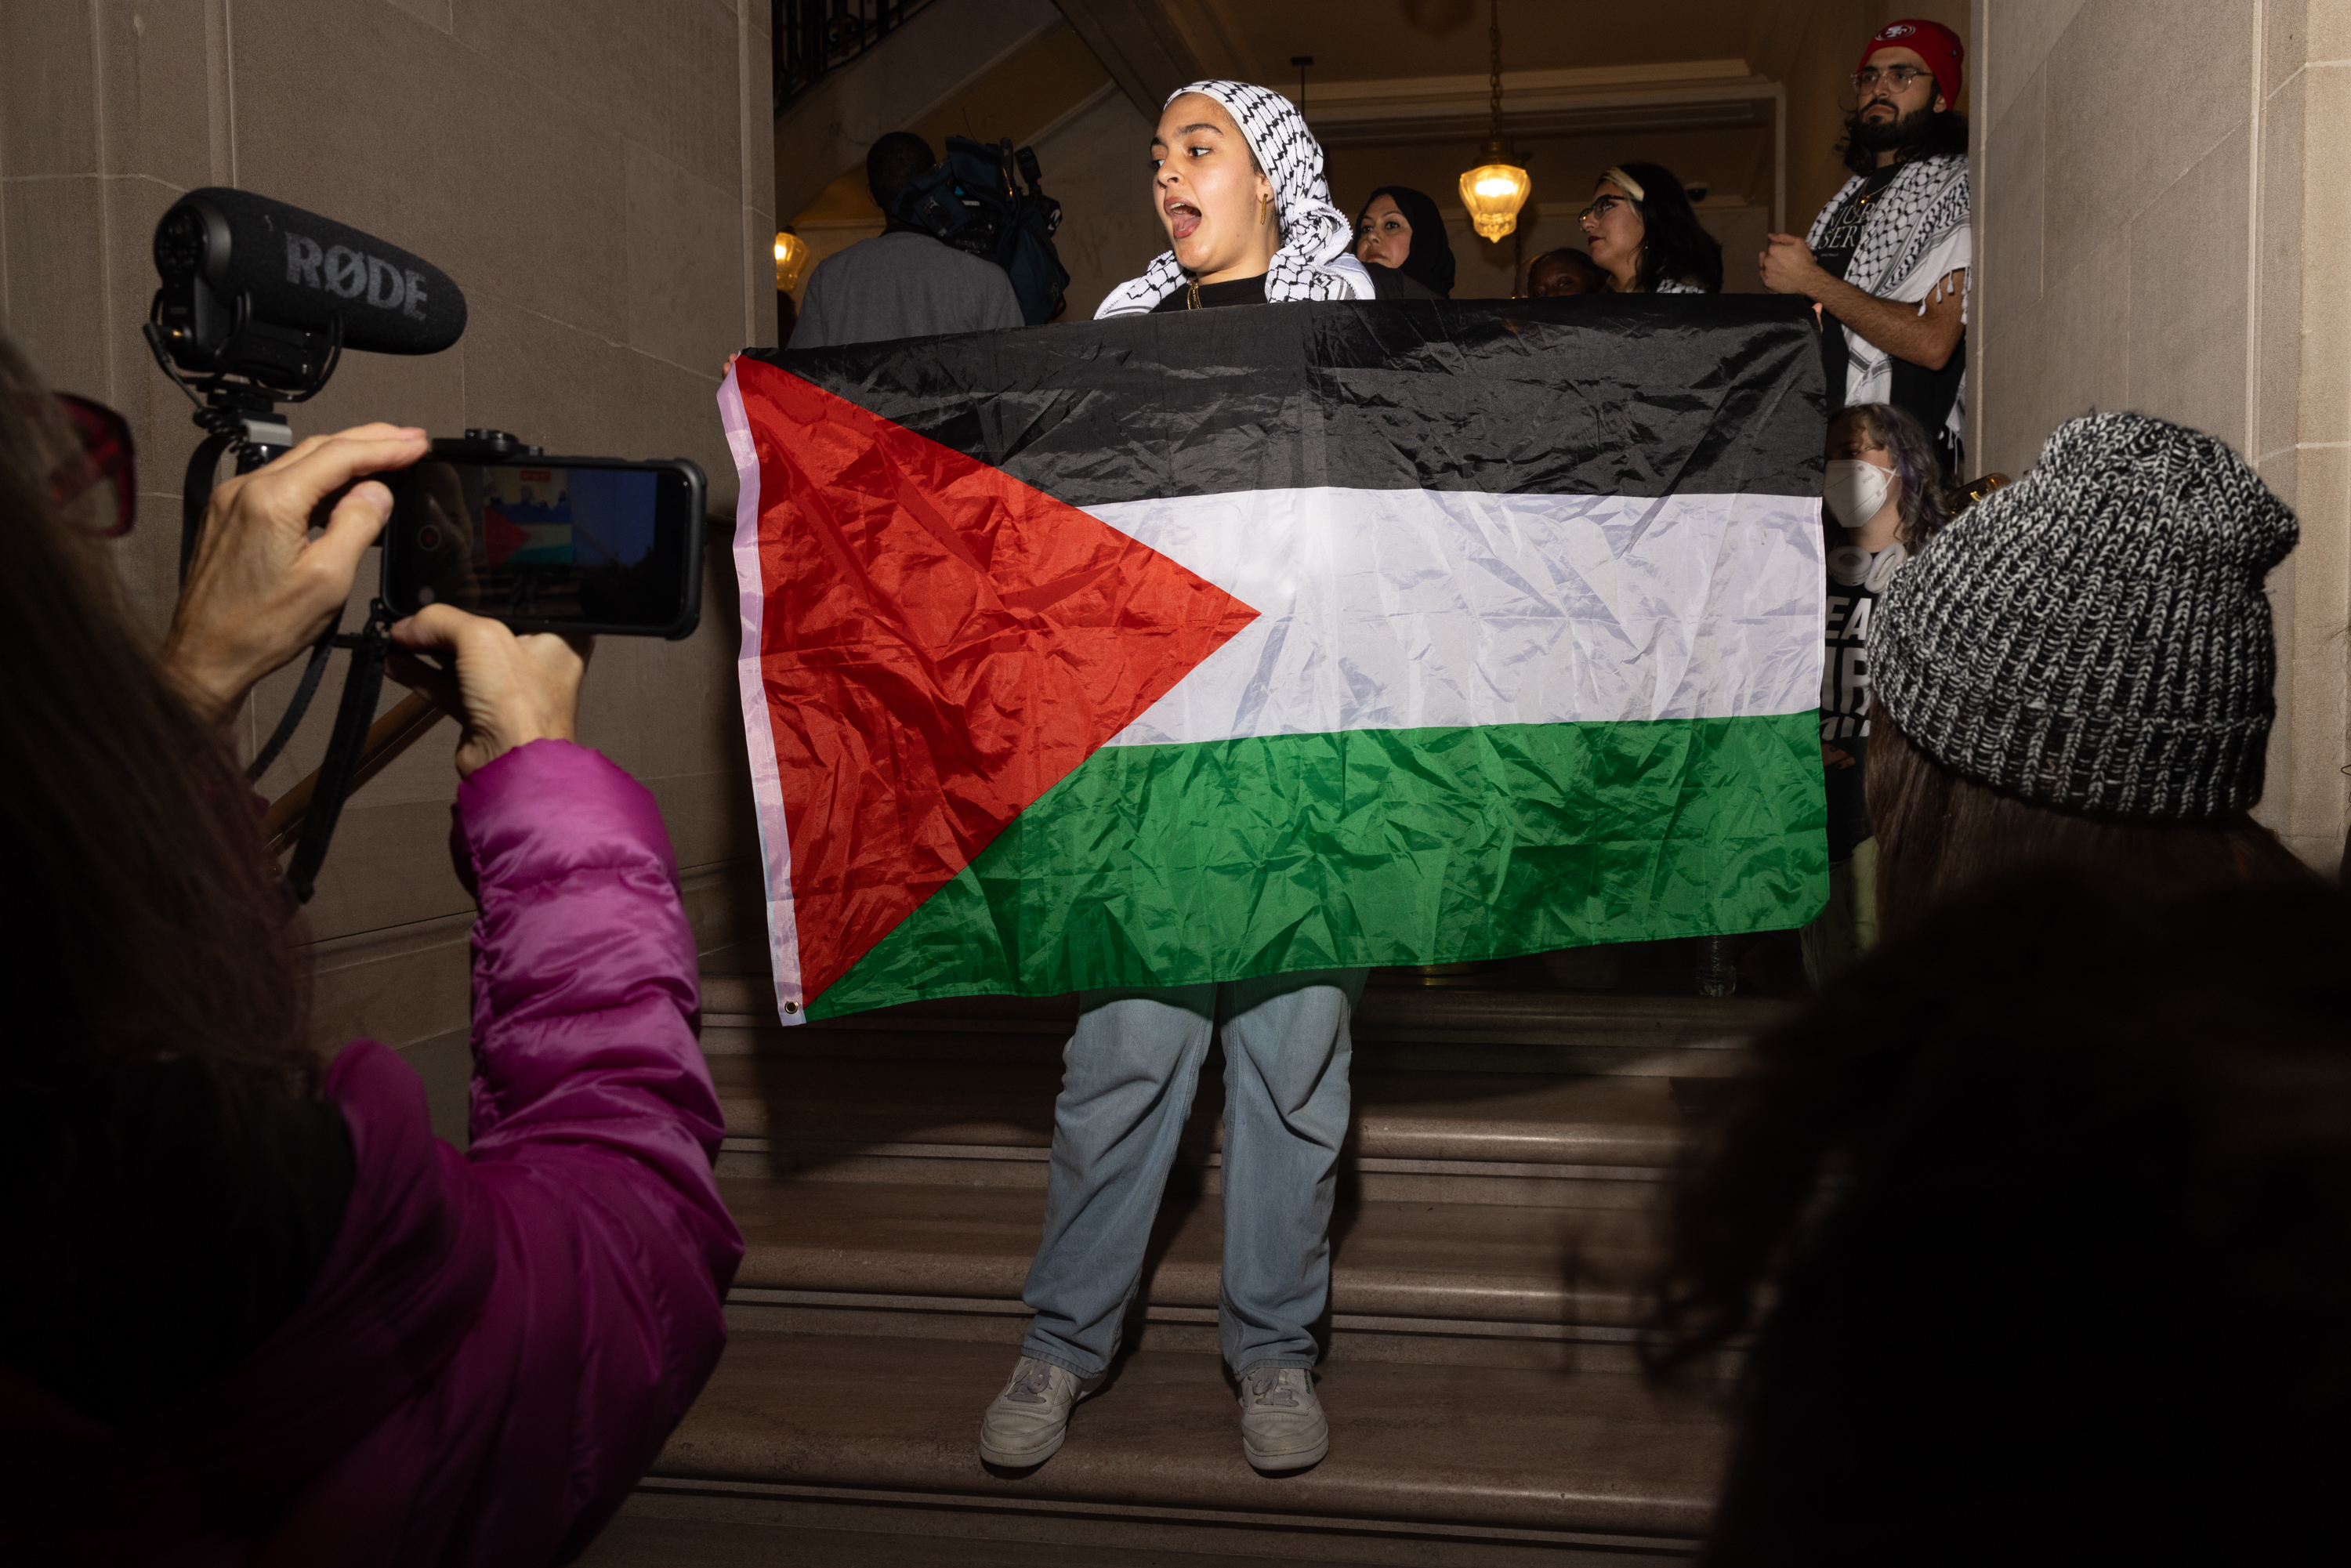 A person holds a Palestinian flag on inside city hall.